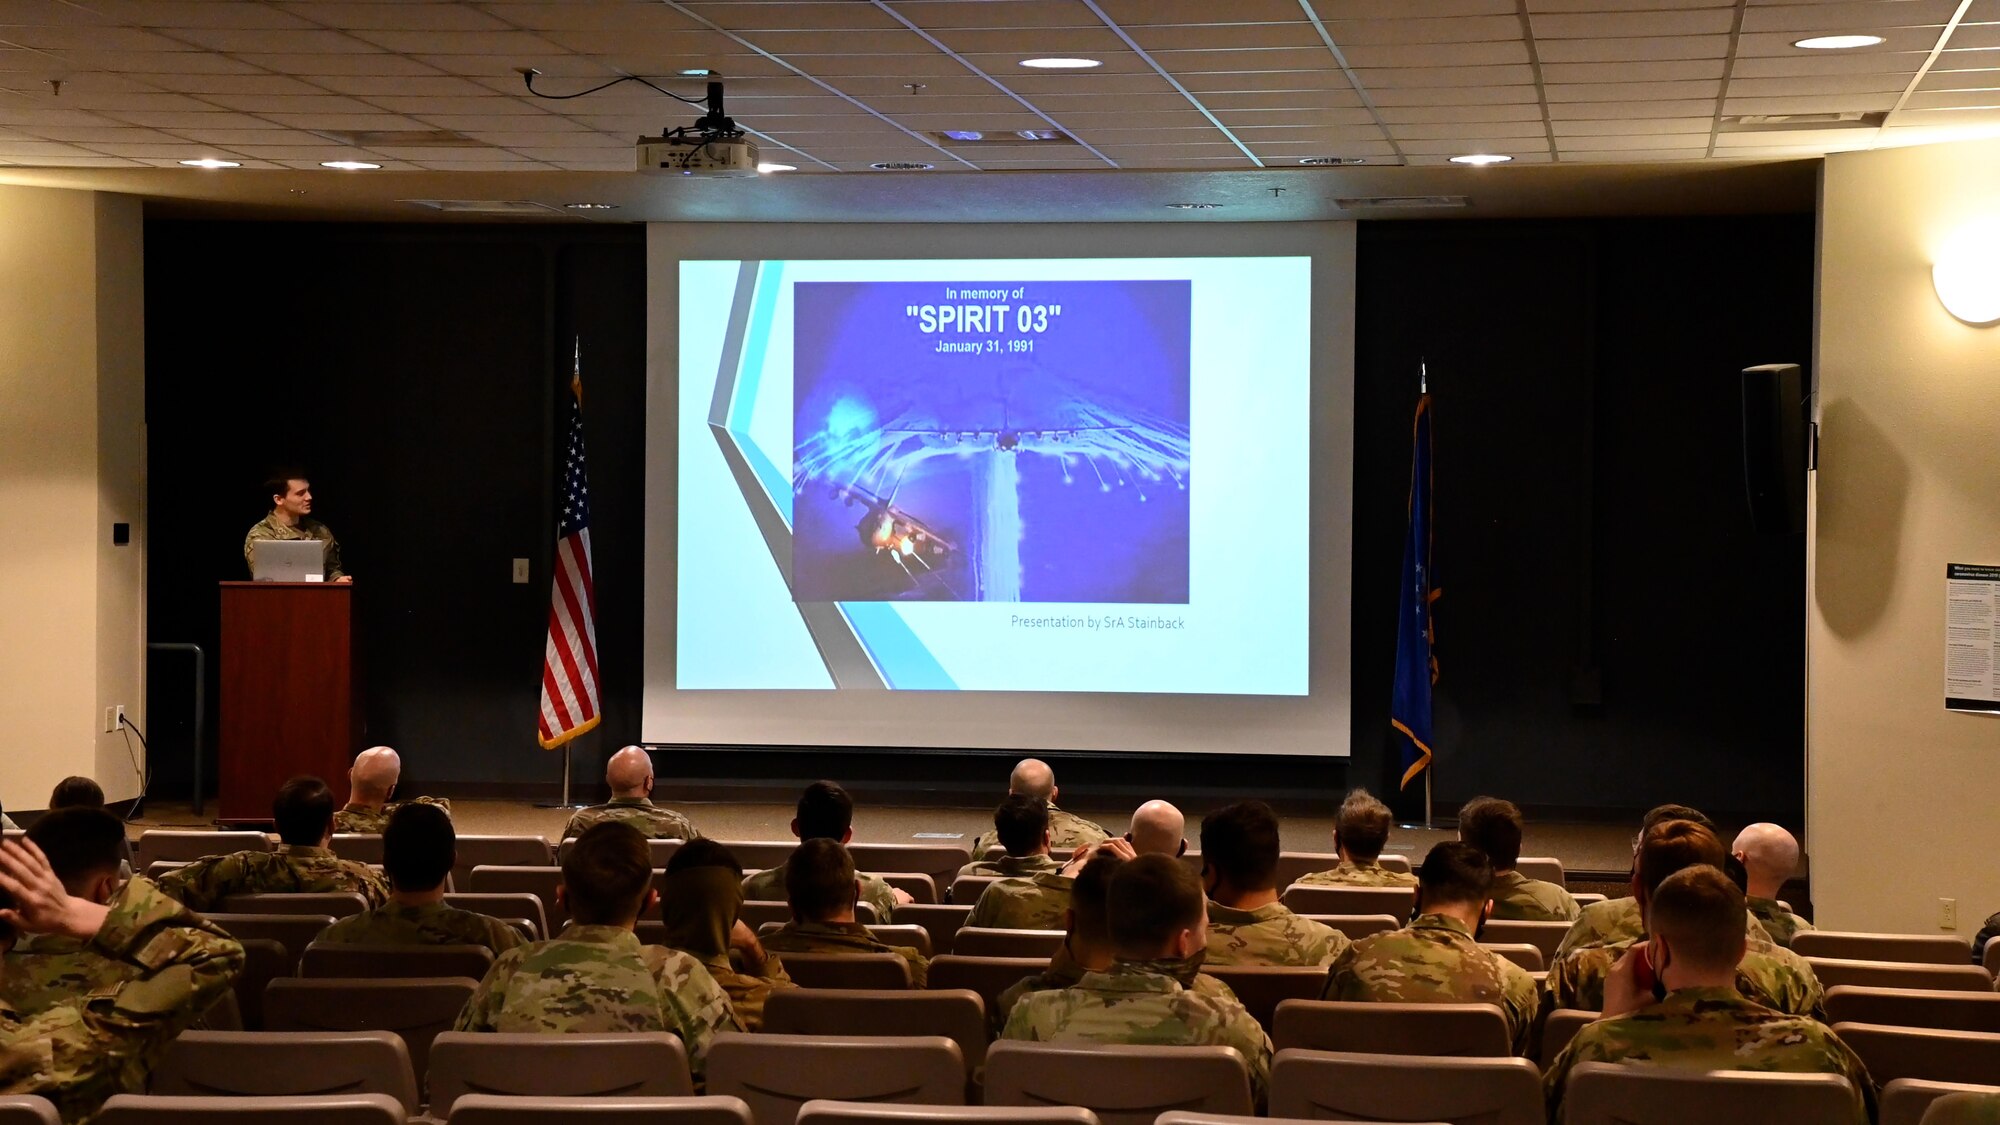 U.S. Airmen of the 16th Special Operations Squadron attend a memorial brief for the crew of Spirit 03 at Cannon Air Force Base, New Mexico, Jan 31, 2022. Spirit 03 was the last AC-130 gunship shot down in combat, lost during Operation Desert Storm. The 16 SOS honored the crew by performing live fire training at Spirit live fire range, a memorial flyover Cannon and held the brief detailing the story of the aircrew and advancements made as a result of the loss of Spirit 03. (U.S. Air Force photo by Senior Airman Christopher Storer)